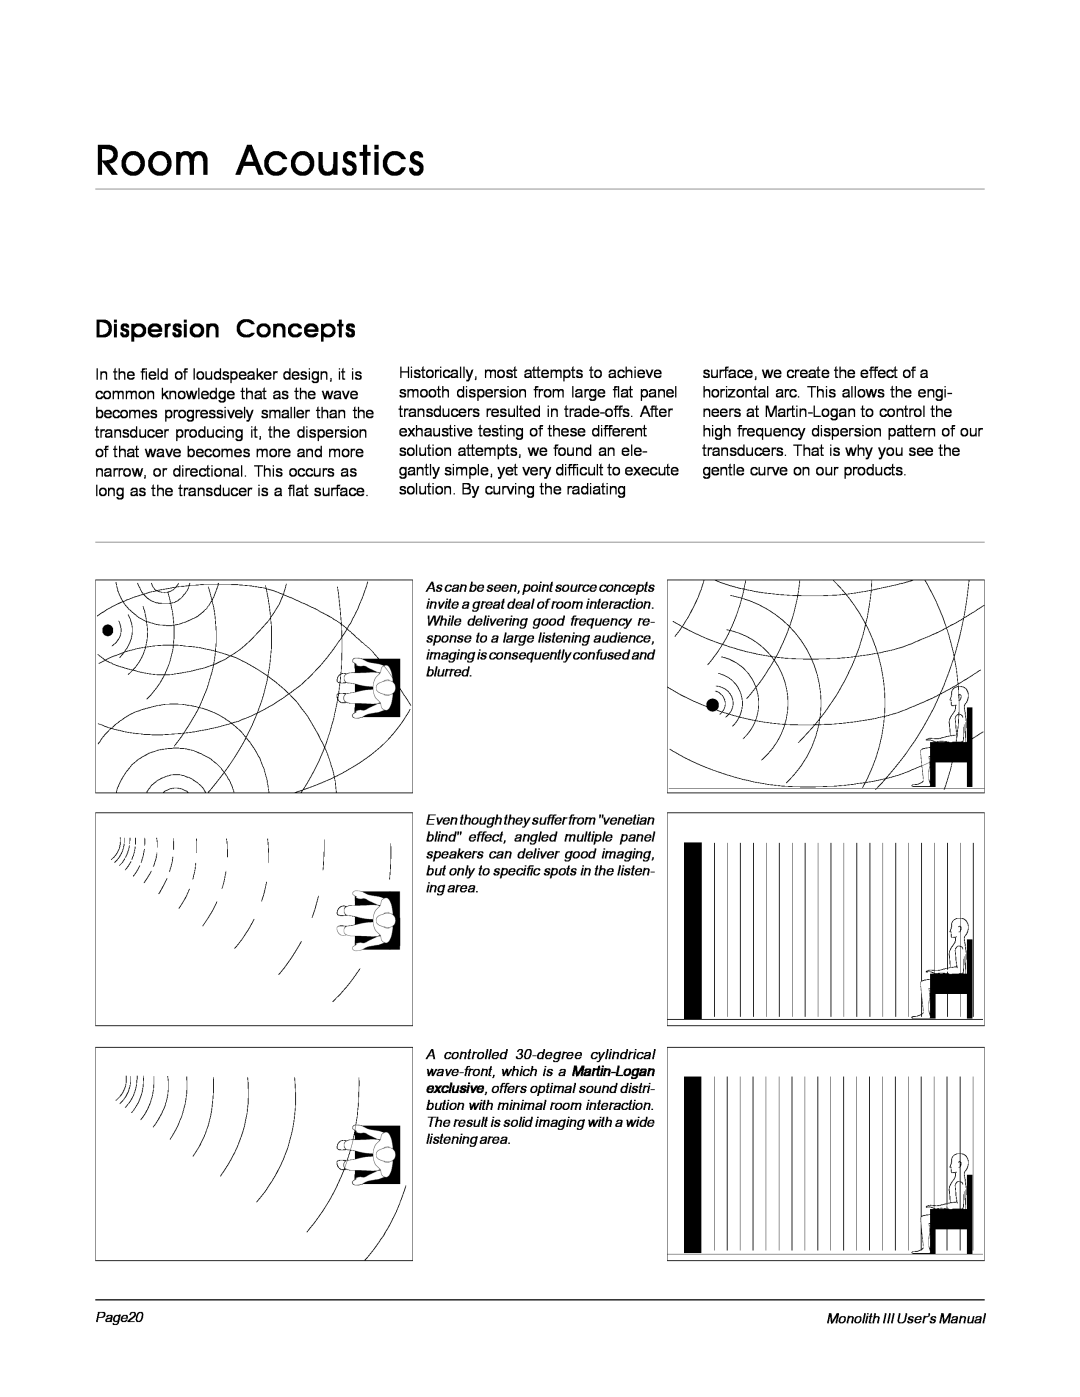 MartinLogan Monolith III Dispersion Concepts, Room Acoustics, A controlled 30-degreecylindrical, listening area, Page20 